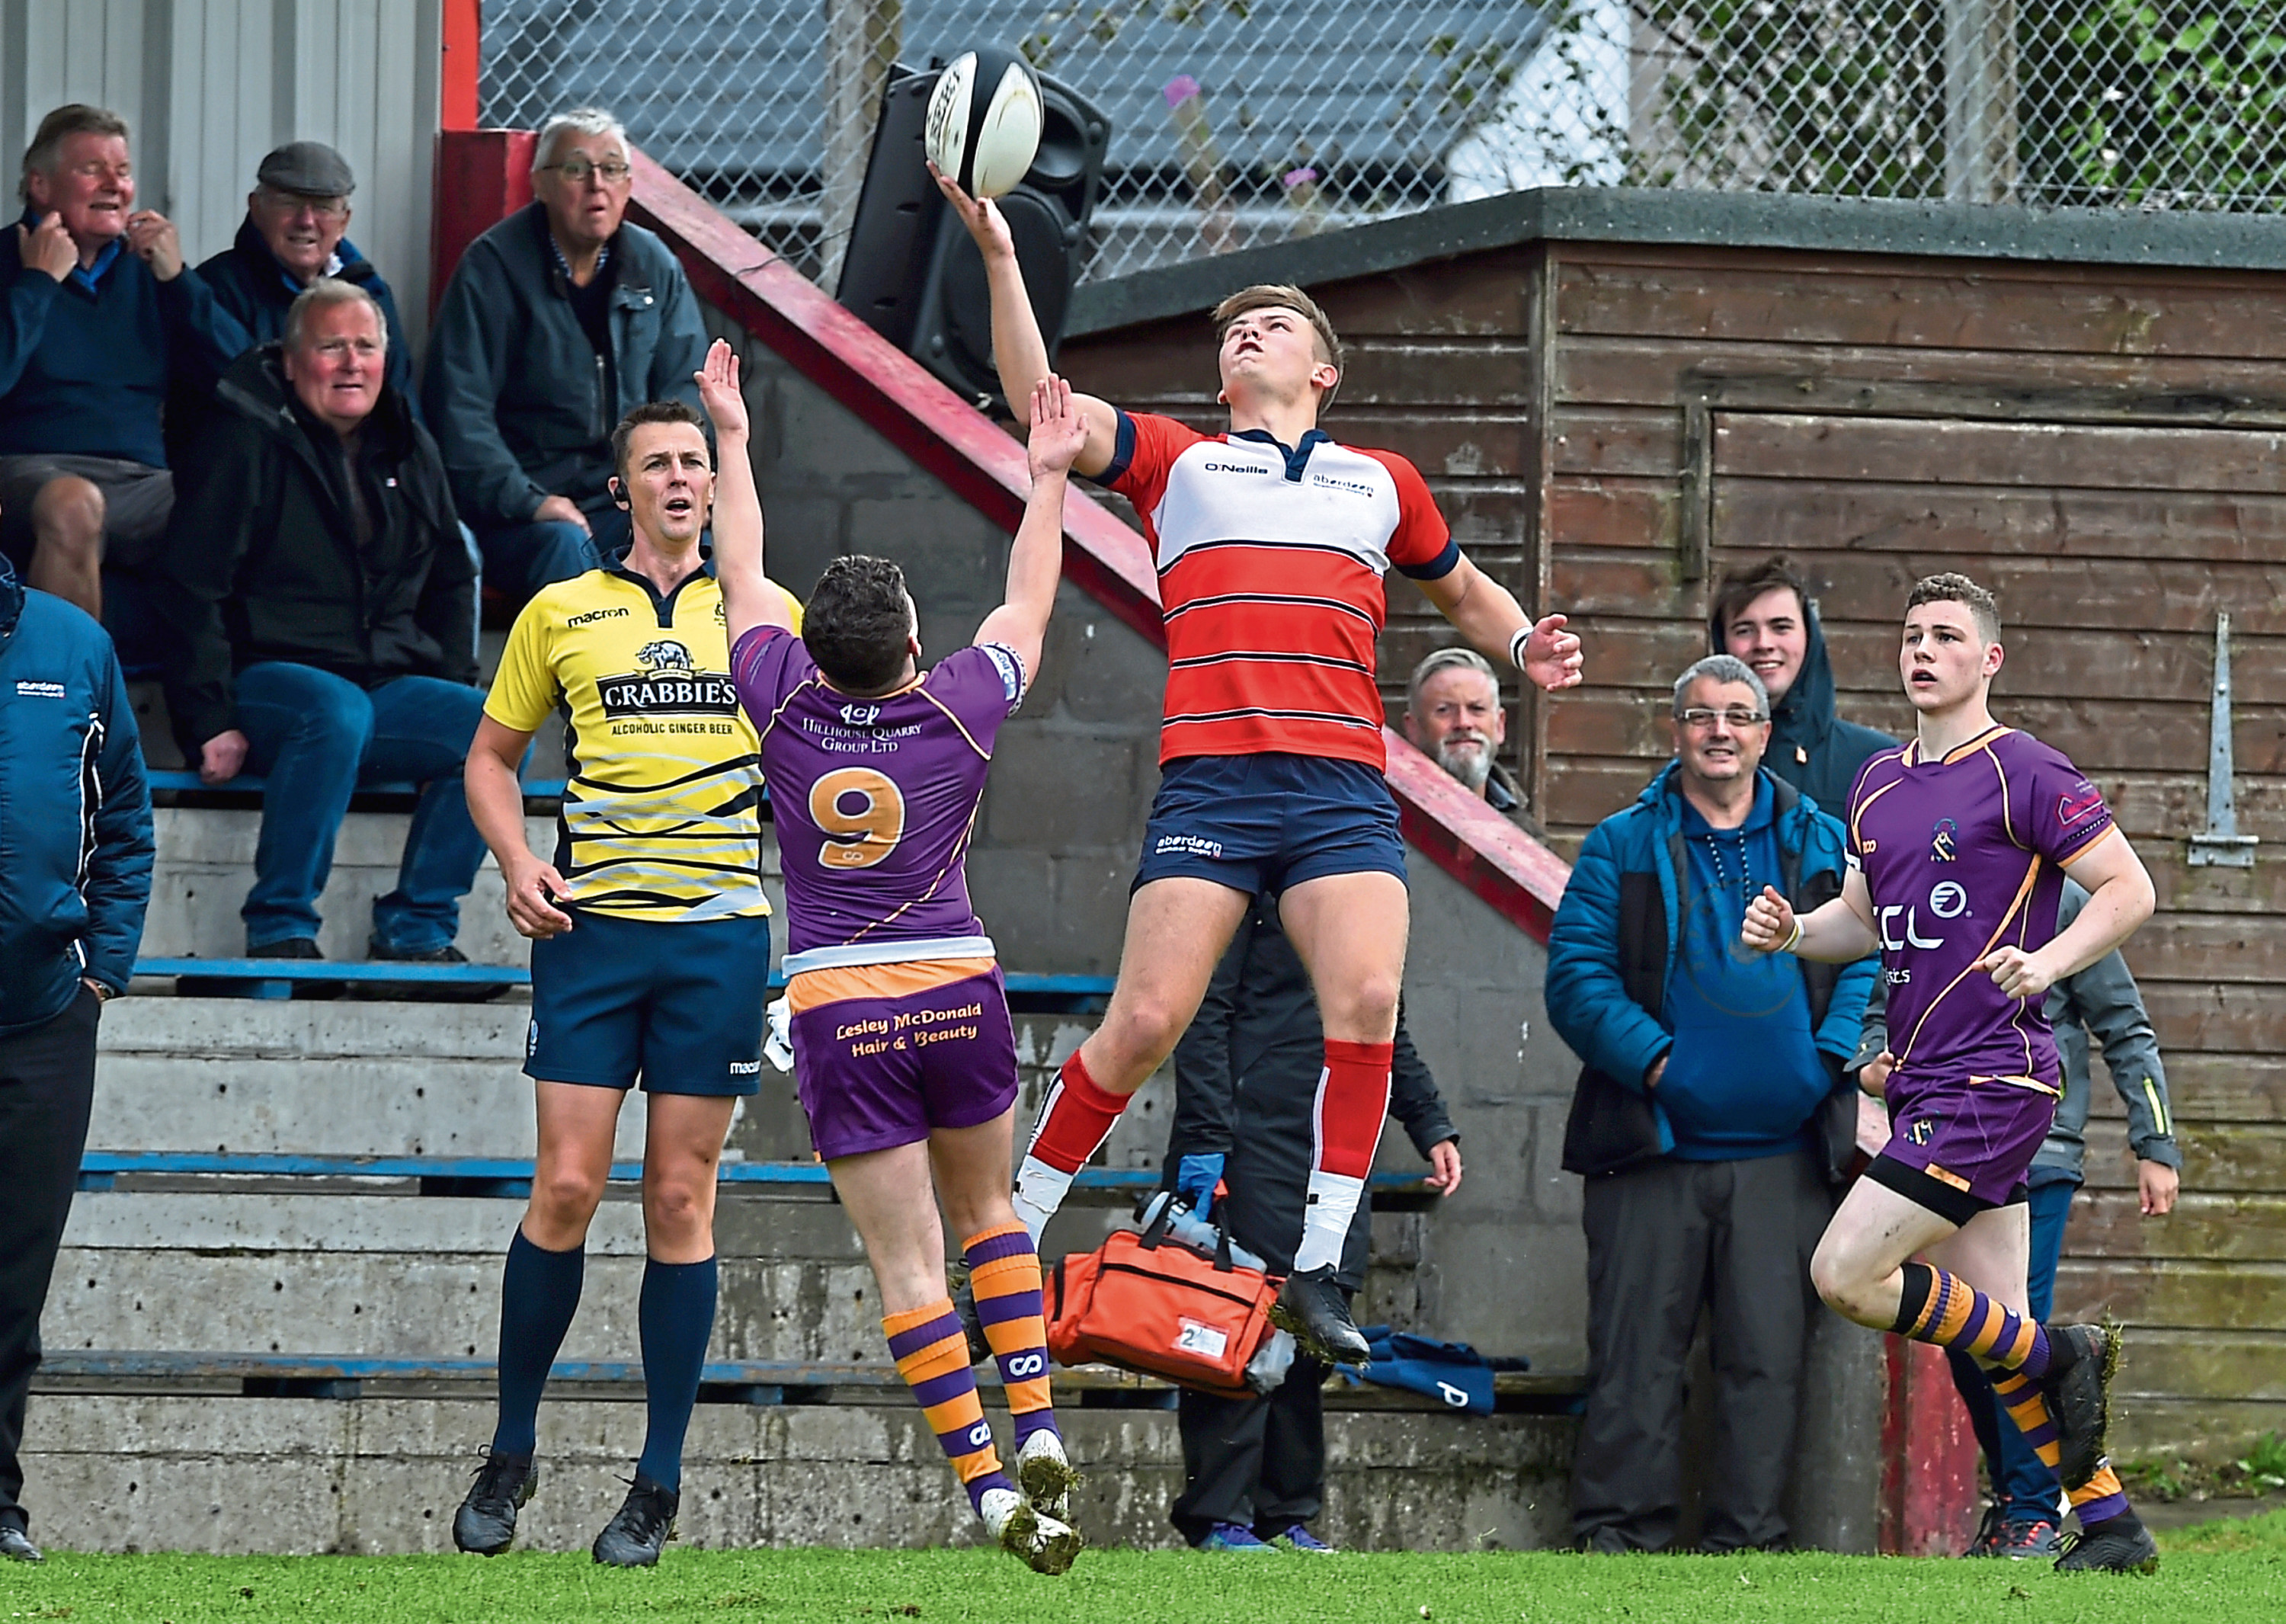 CR0013452
First round of the Scottish Cup - Aberdeen Grammar (red) v Marr RFC (purple) at Rubislaw.
Picture of Nathan Brown jumping for the ball.

Picture by KENNY ELRICK     31/08/2019